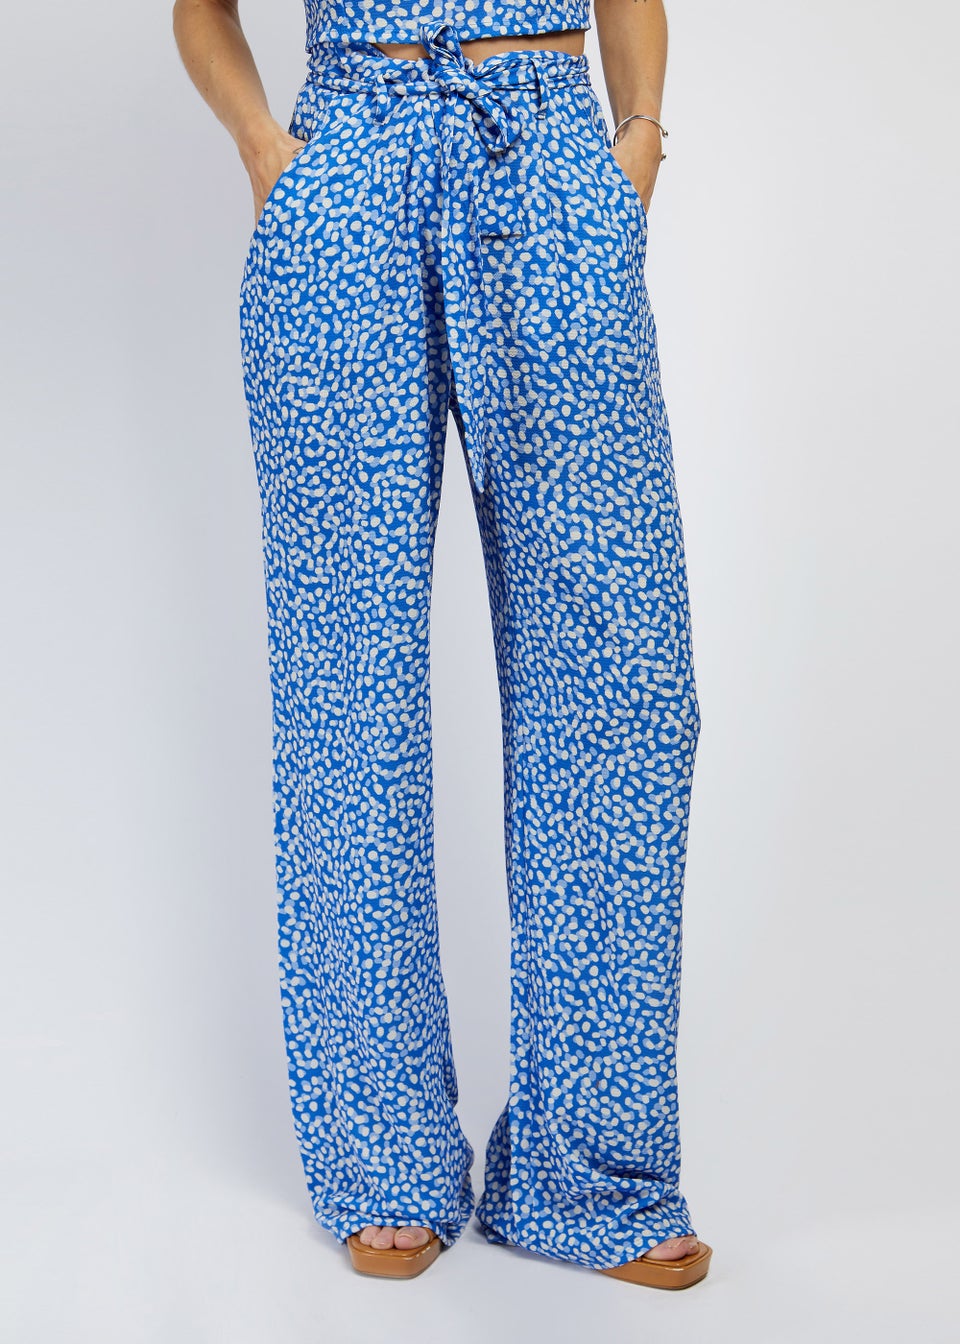 Girls on Film by Dani Dyer Blue Floral Wide Leg Co-Ord Trousers - Matalan